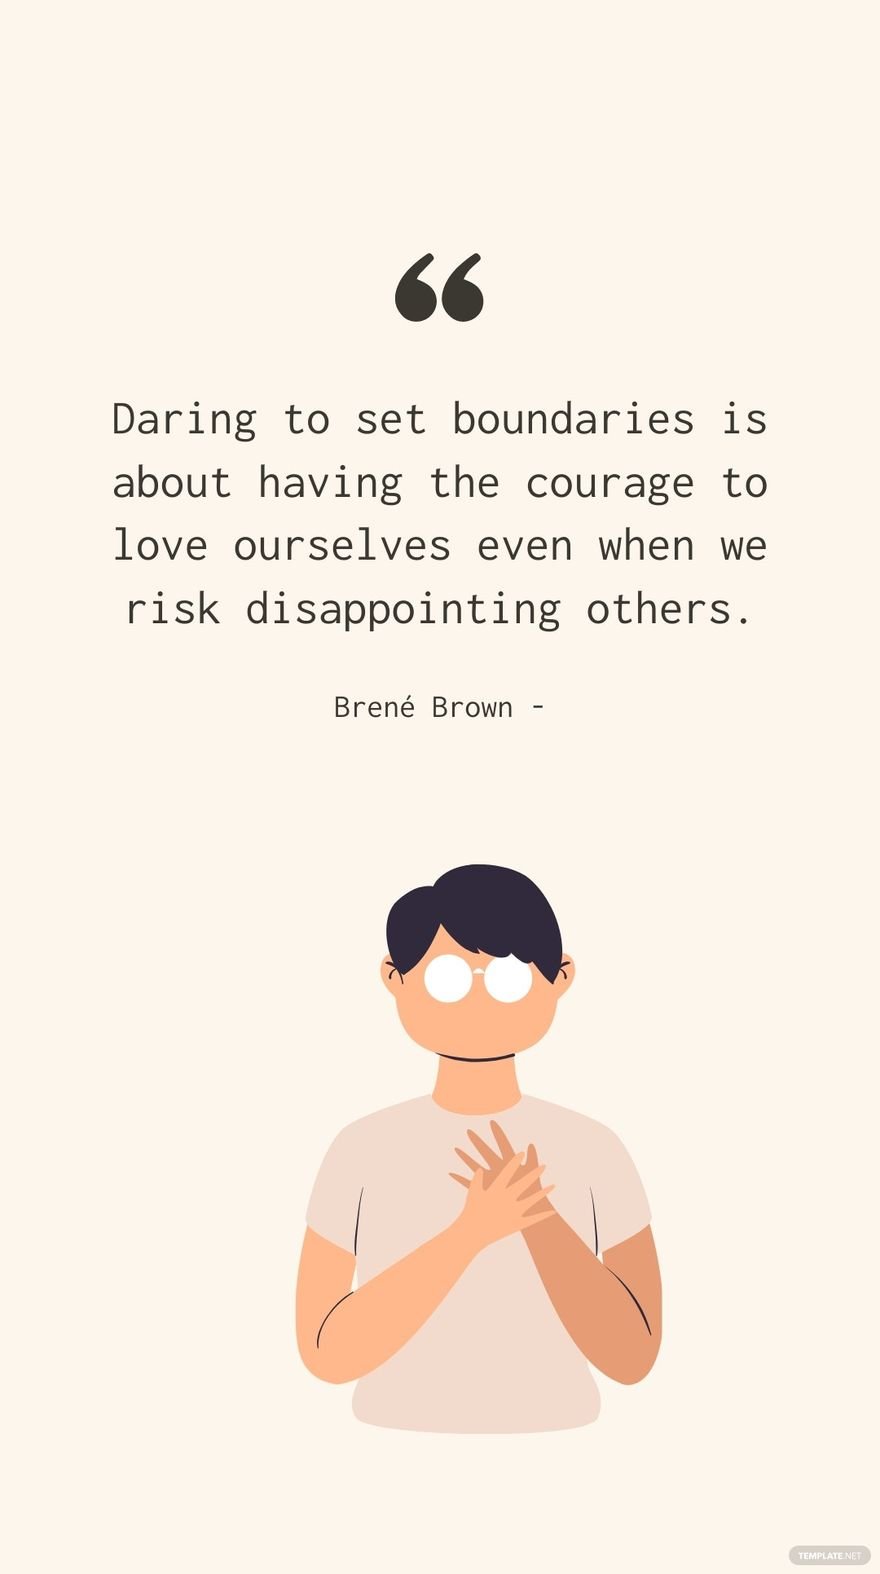 Brené Brown - Daring to set boundaries is about having the courage to love ourselves even when we risk disappointing others. in JPG